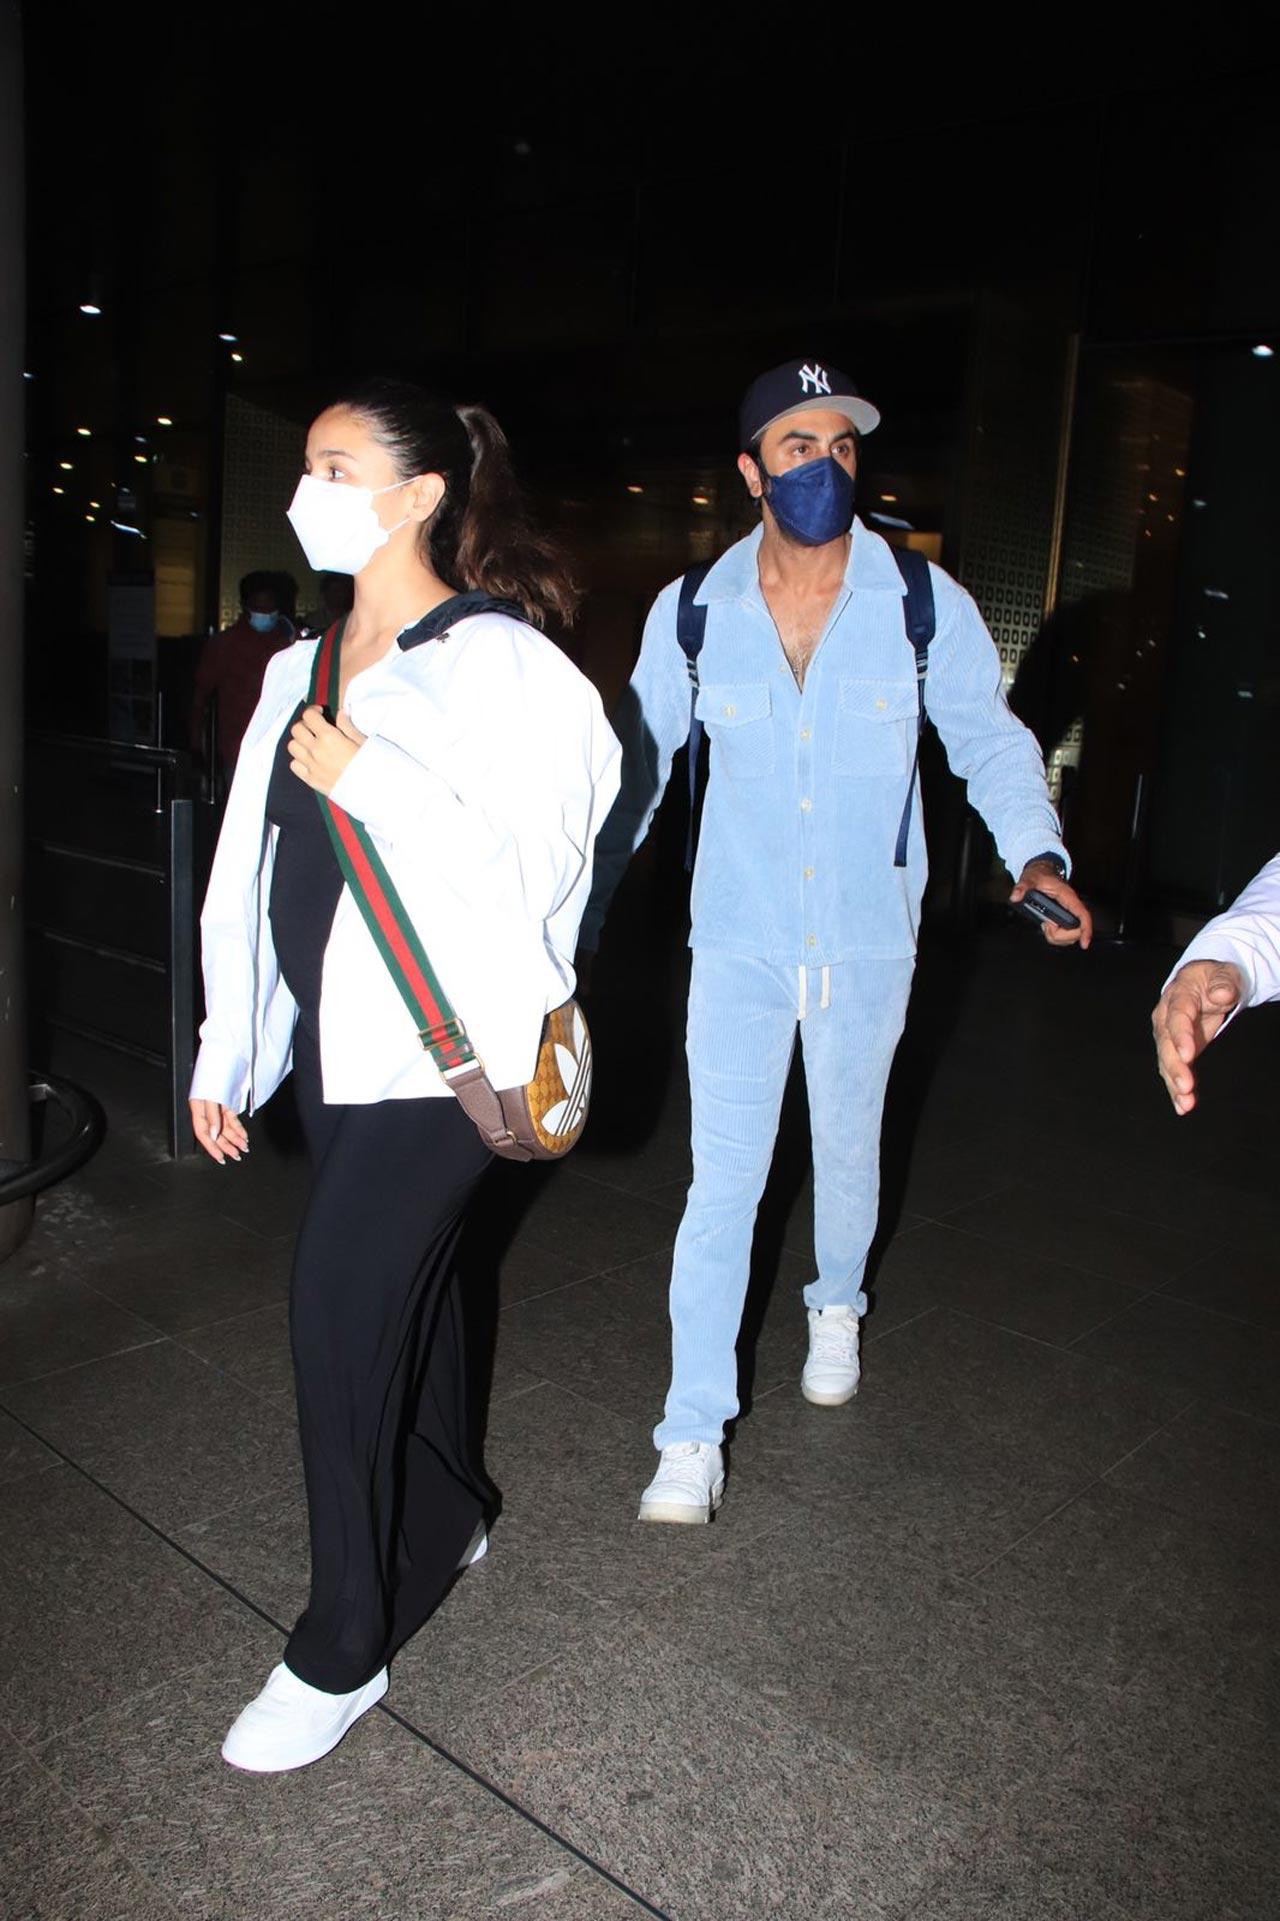 In the pictures, Ranbir and Alia are seen exiting the airport and making their way to their car. Ranbir, the doting husband, is seen protecting Alia from behind as they head towards their car